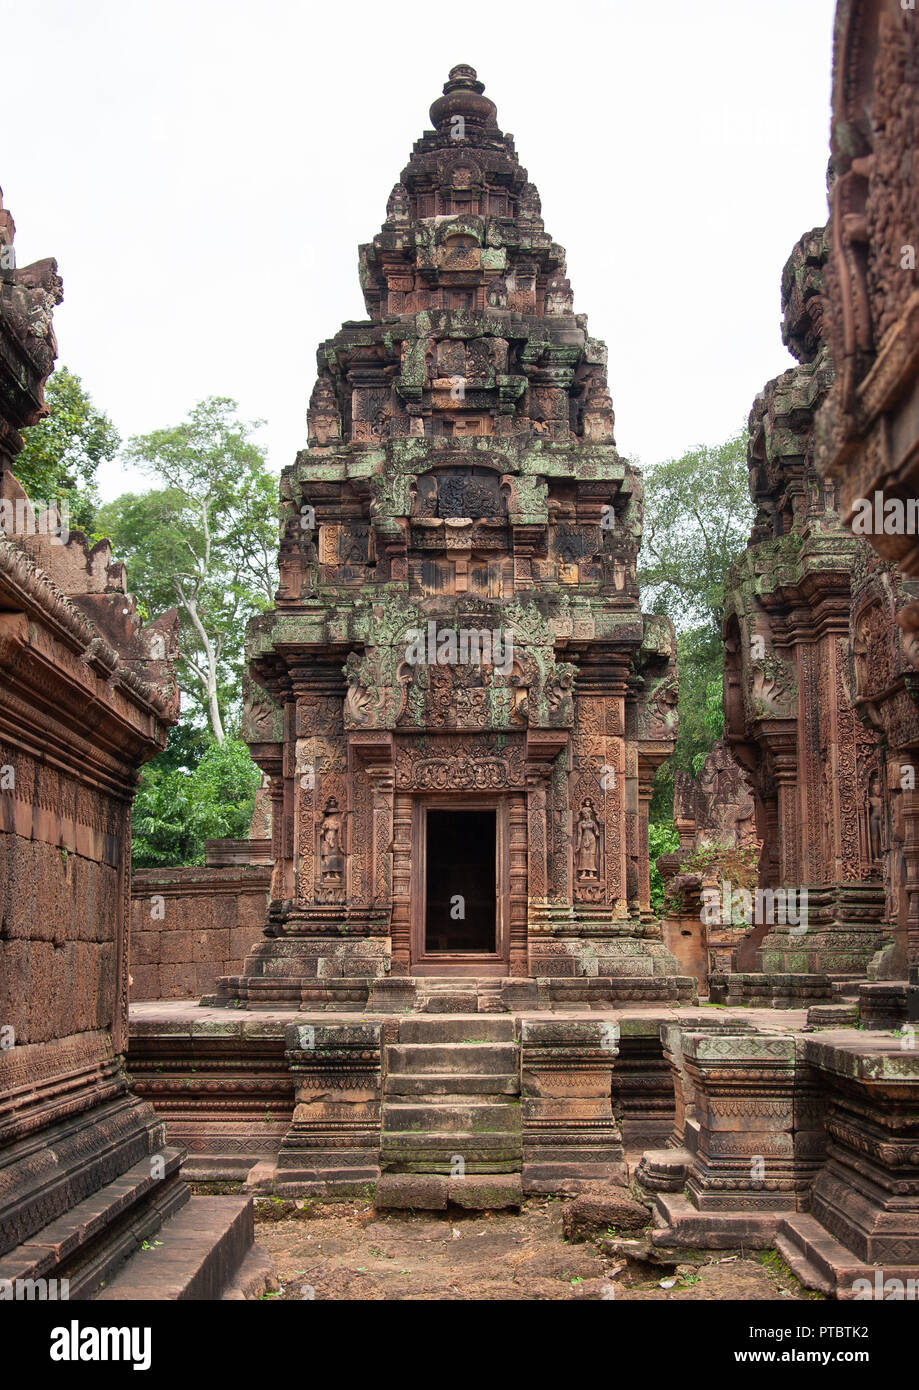 Khmer temple in Angkor wat, Siem Reap Province, Angkor, Cambodia Stock Photo